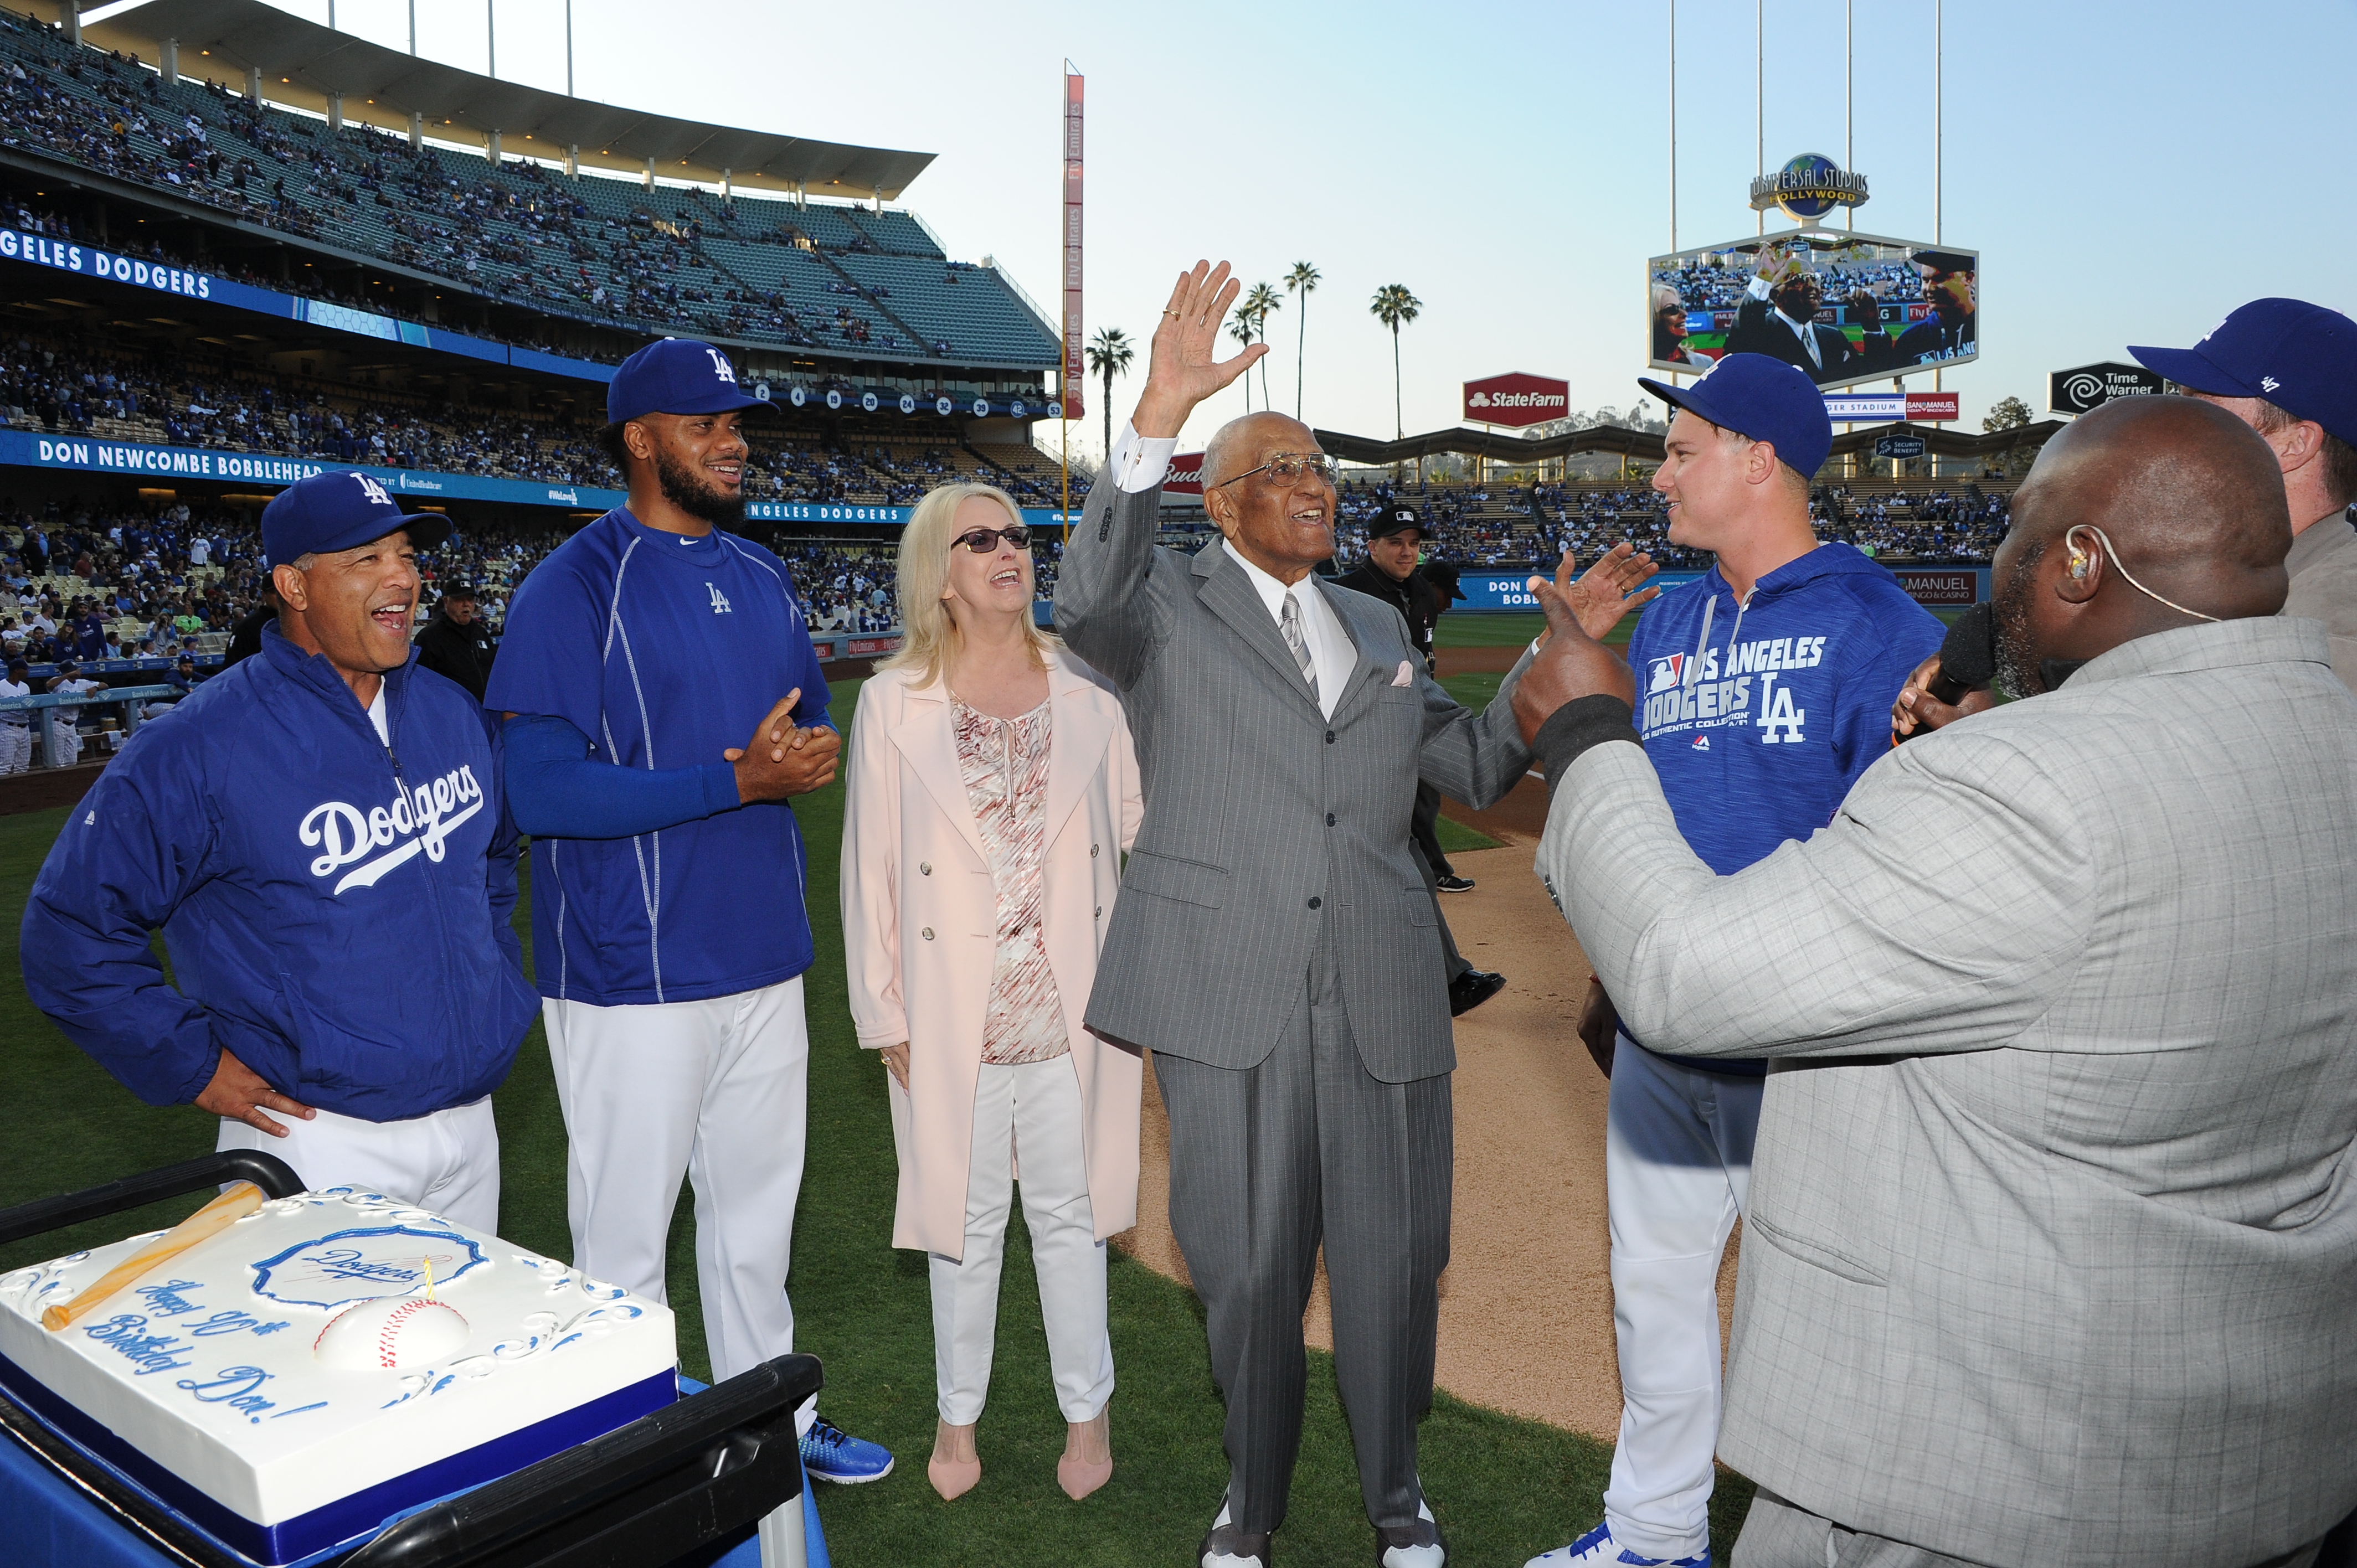 Maury Wills to receive lifetime honor at scouts dinner, by Jon Weisman